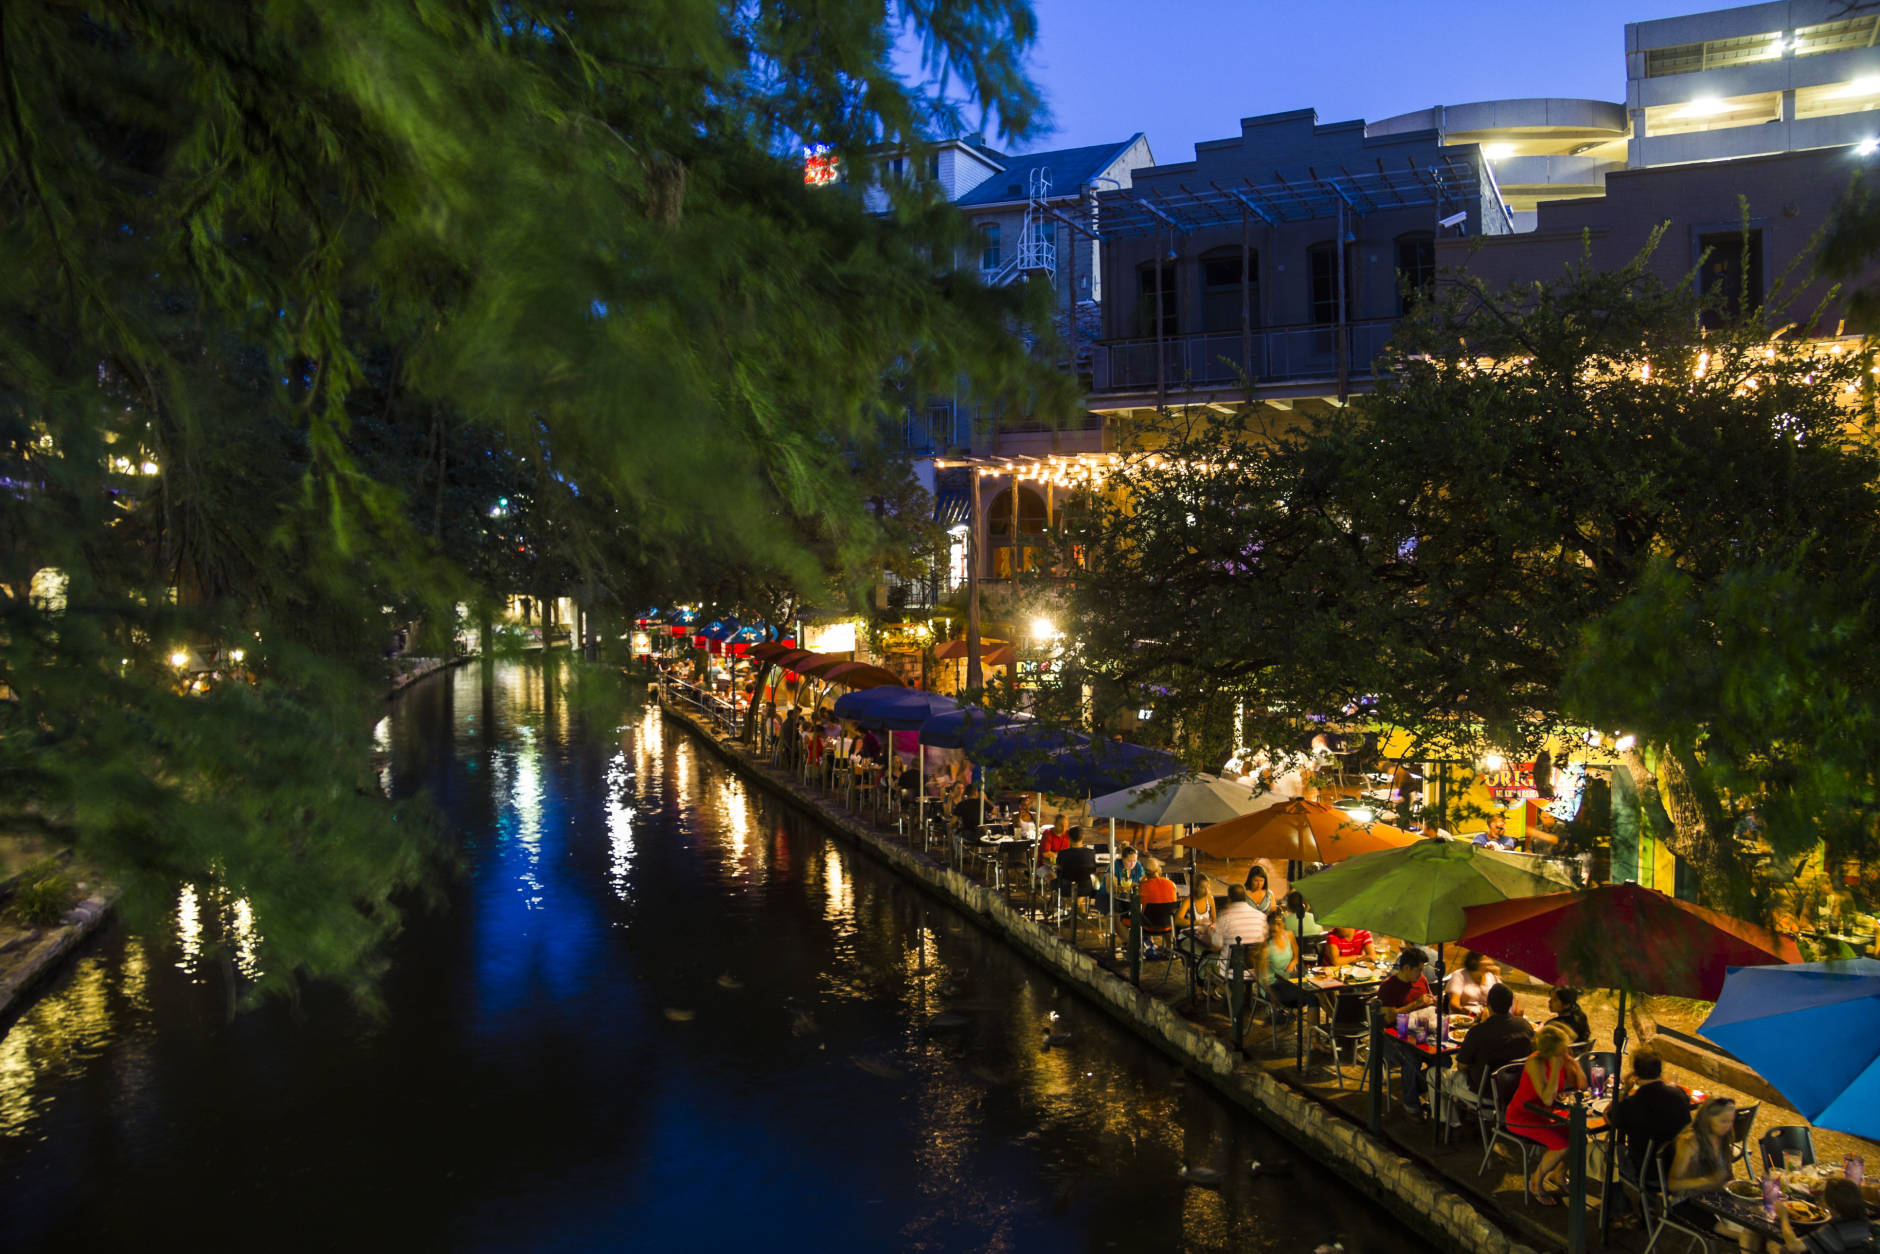 12. San Antonio, Texas

Known for its River Walk and the Alamo, San Antonio lands at No. 12. (Getty Images/iStockphoto/picturist)